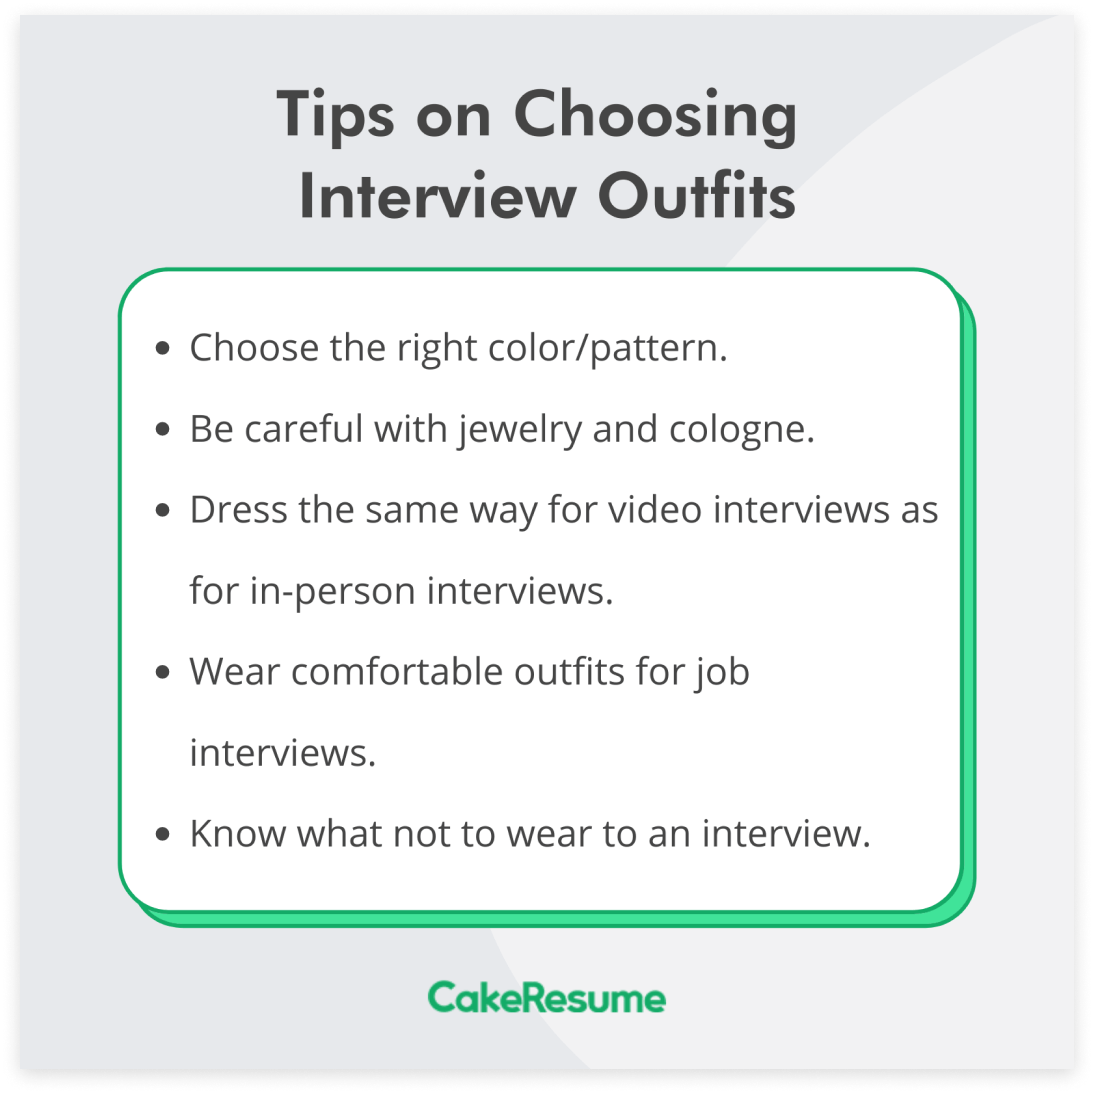 What to Wear to Job Interviews